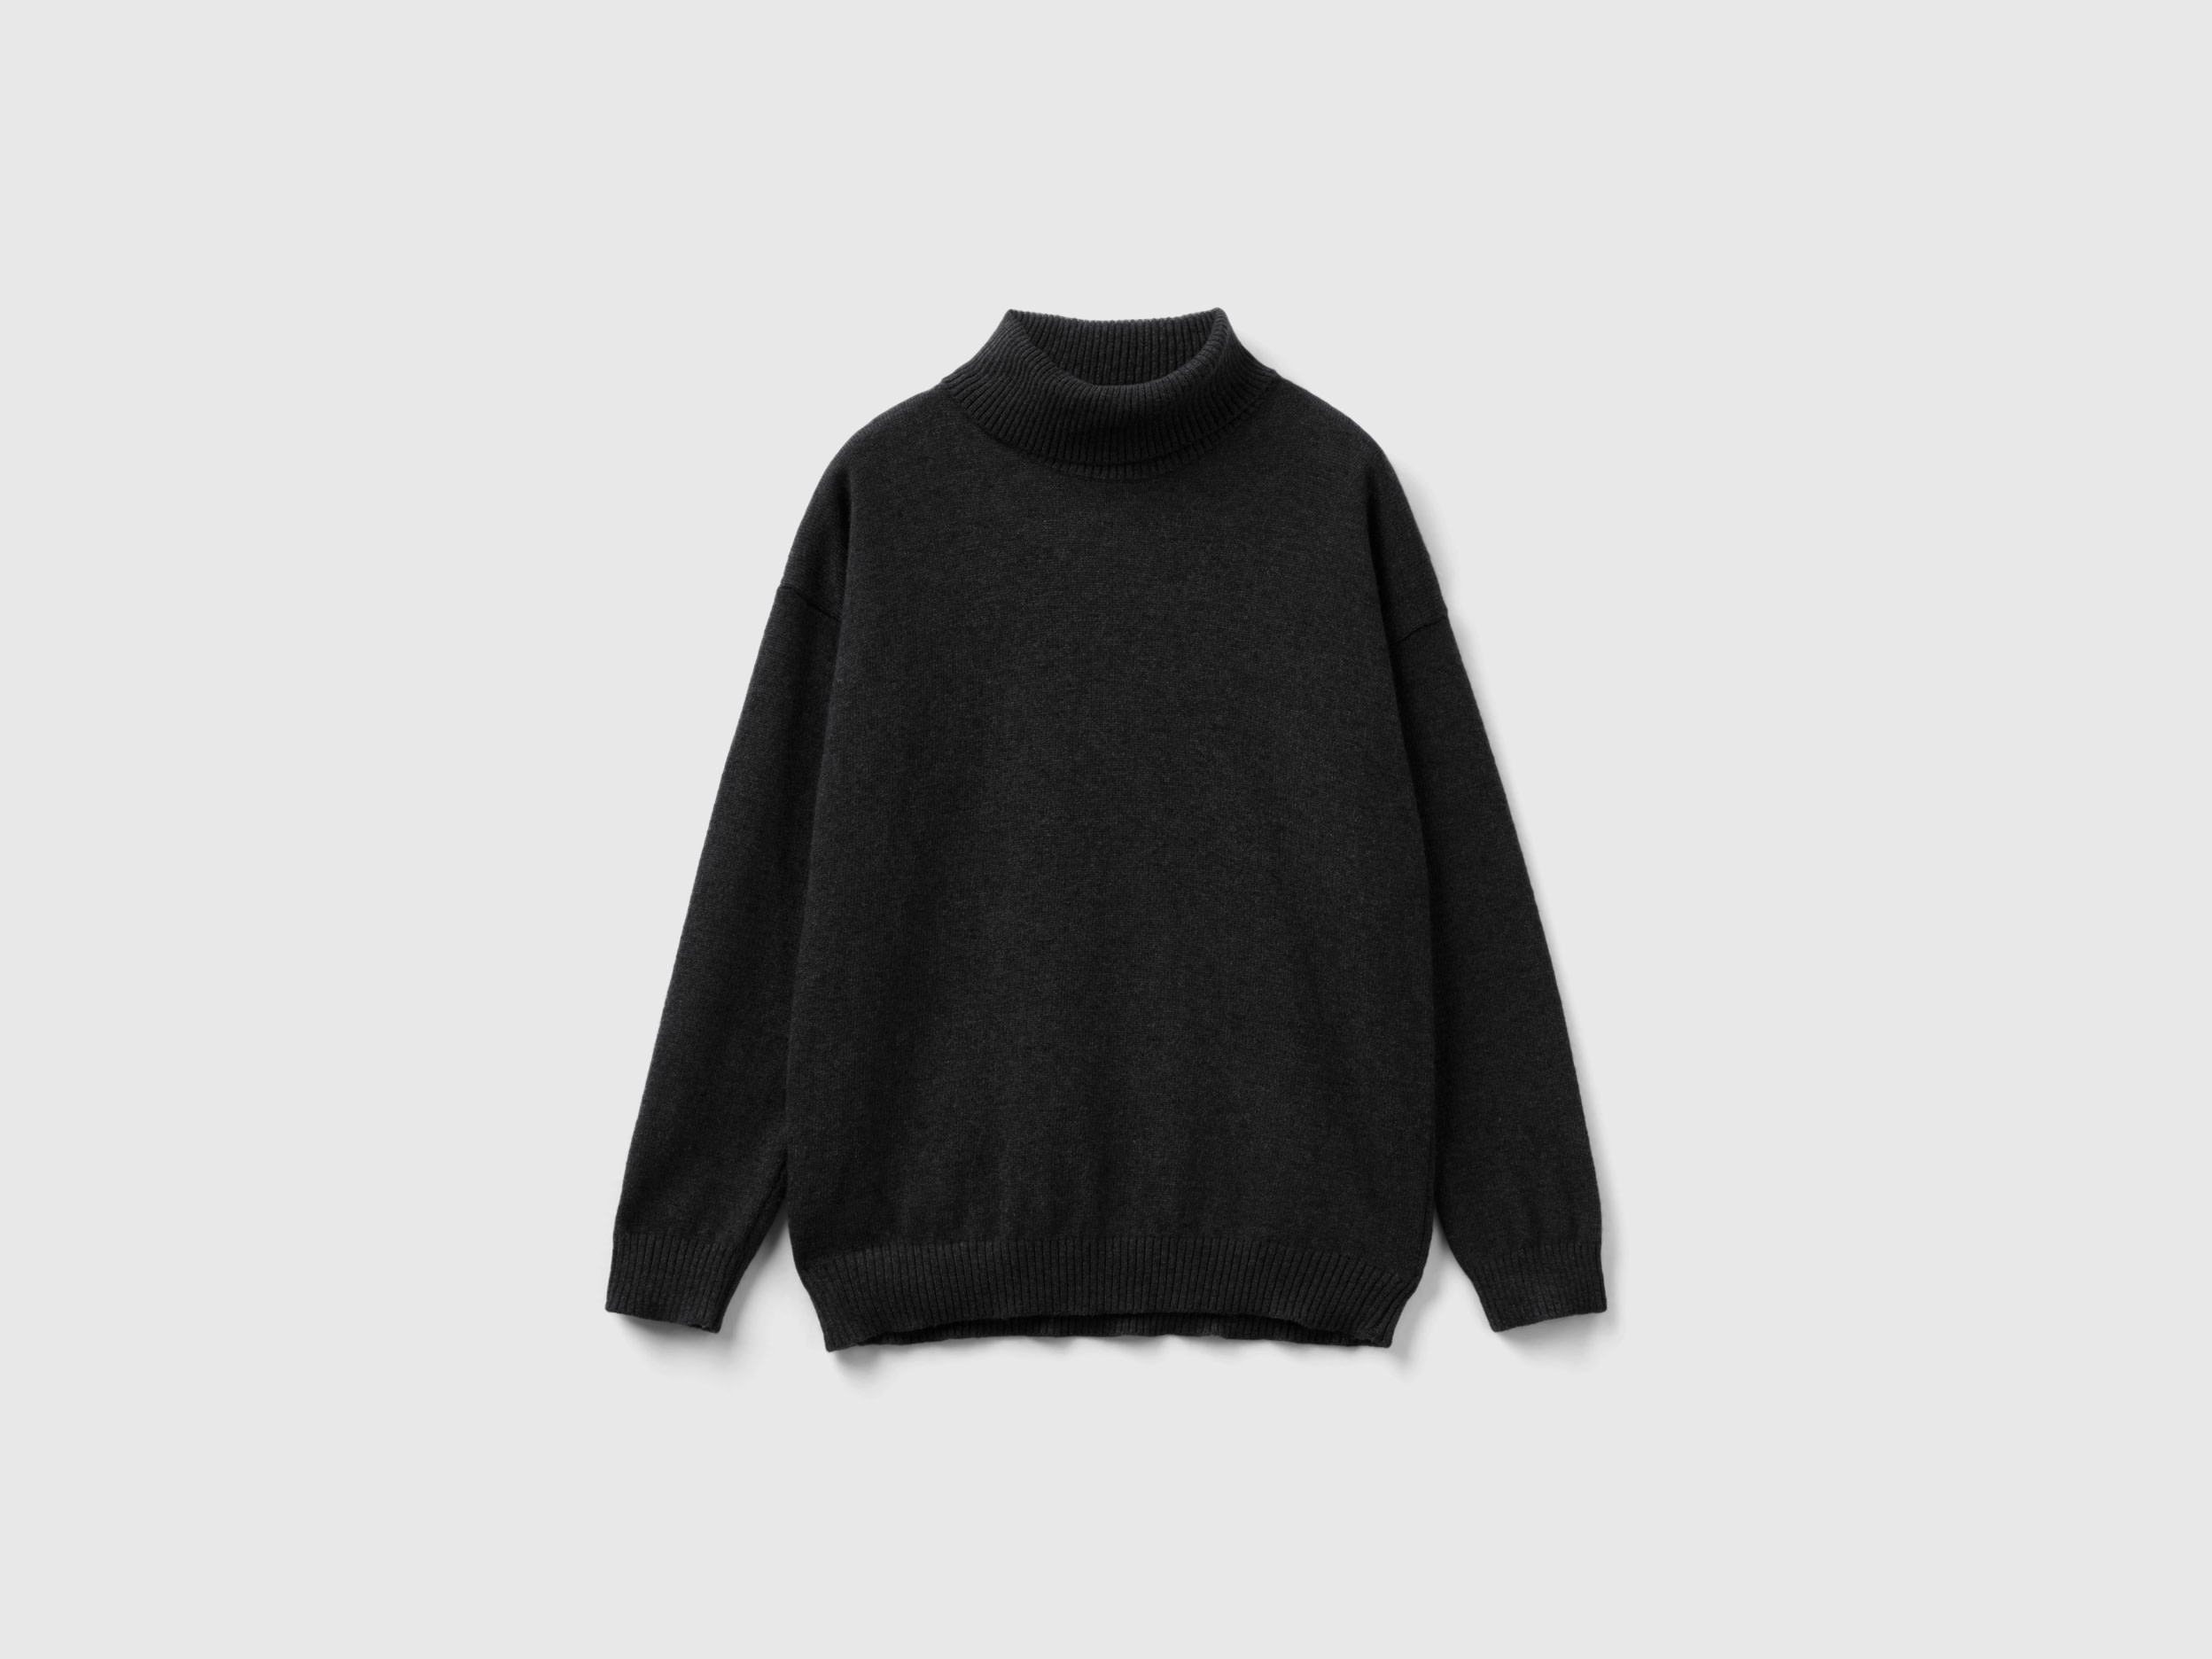 Benetton, Turtleneck Sweater In Cashmere And Wool Blend, size XL, Black, Kids